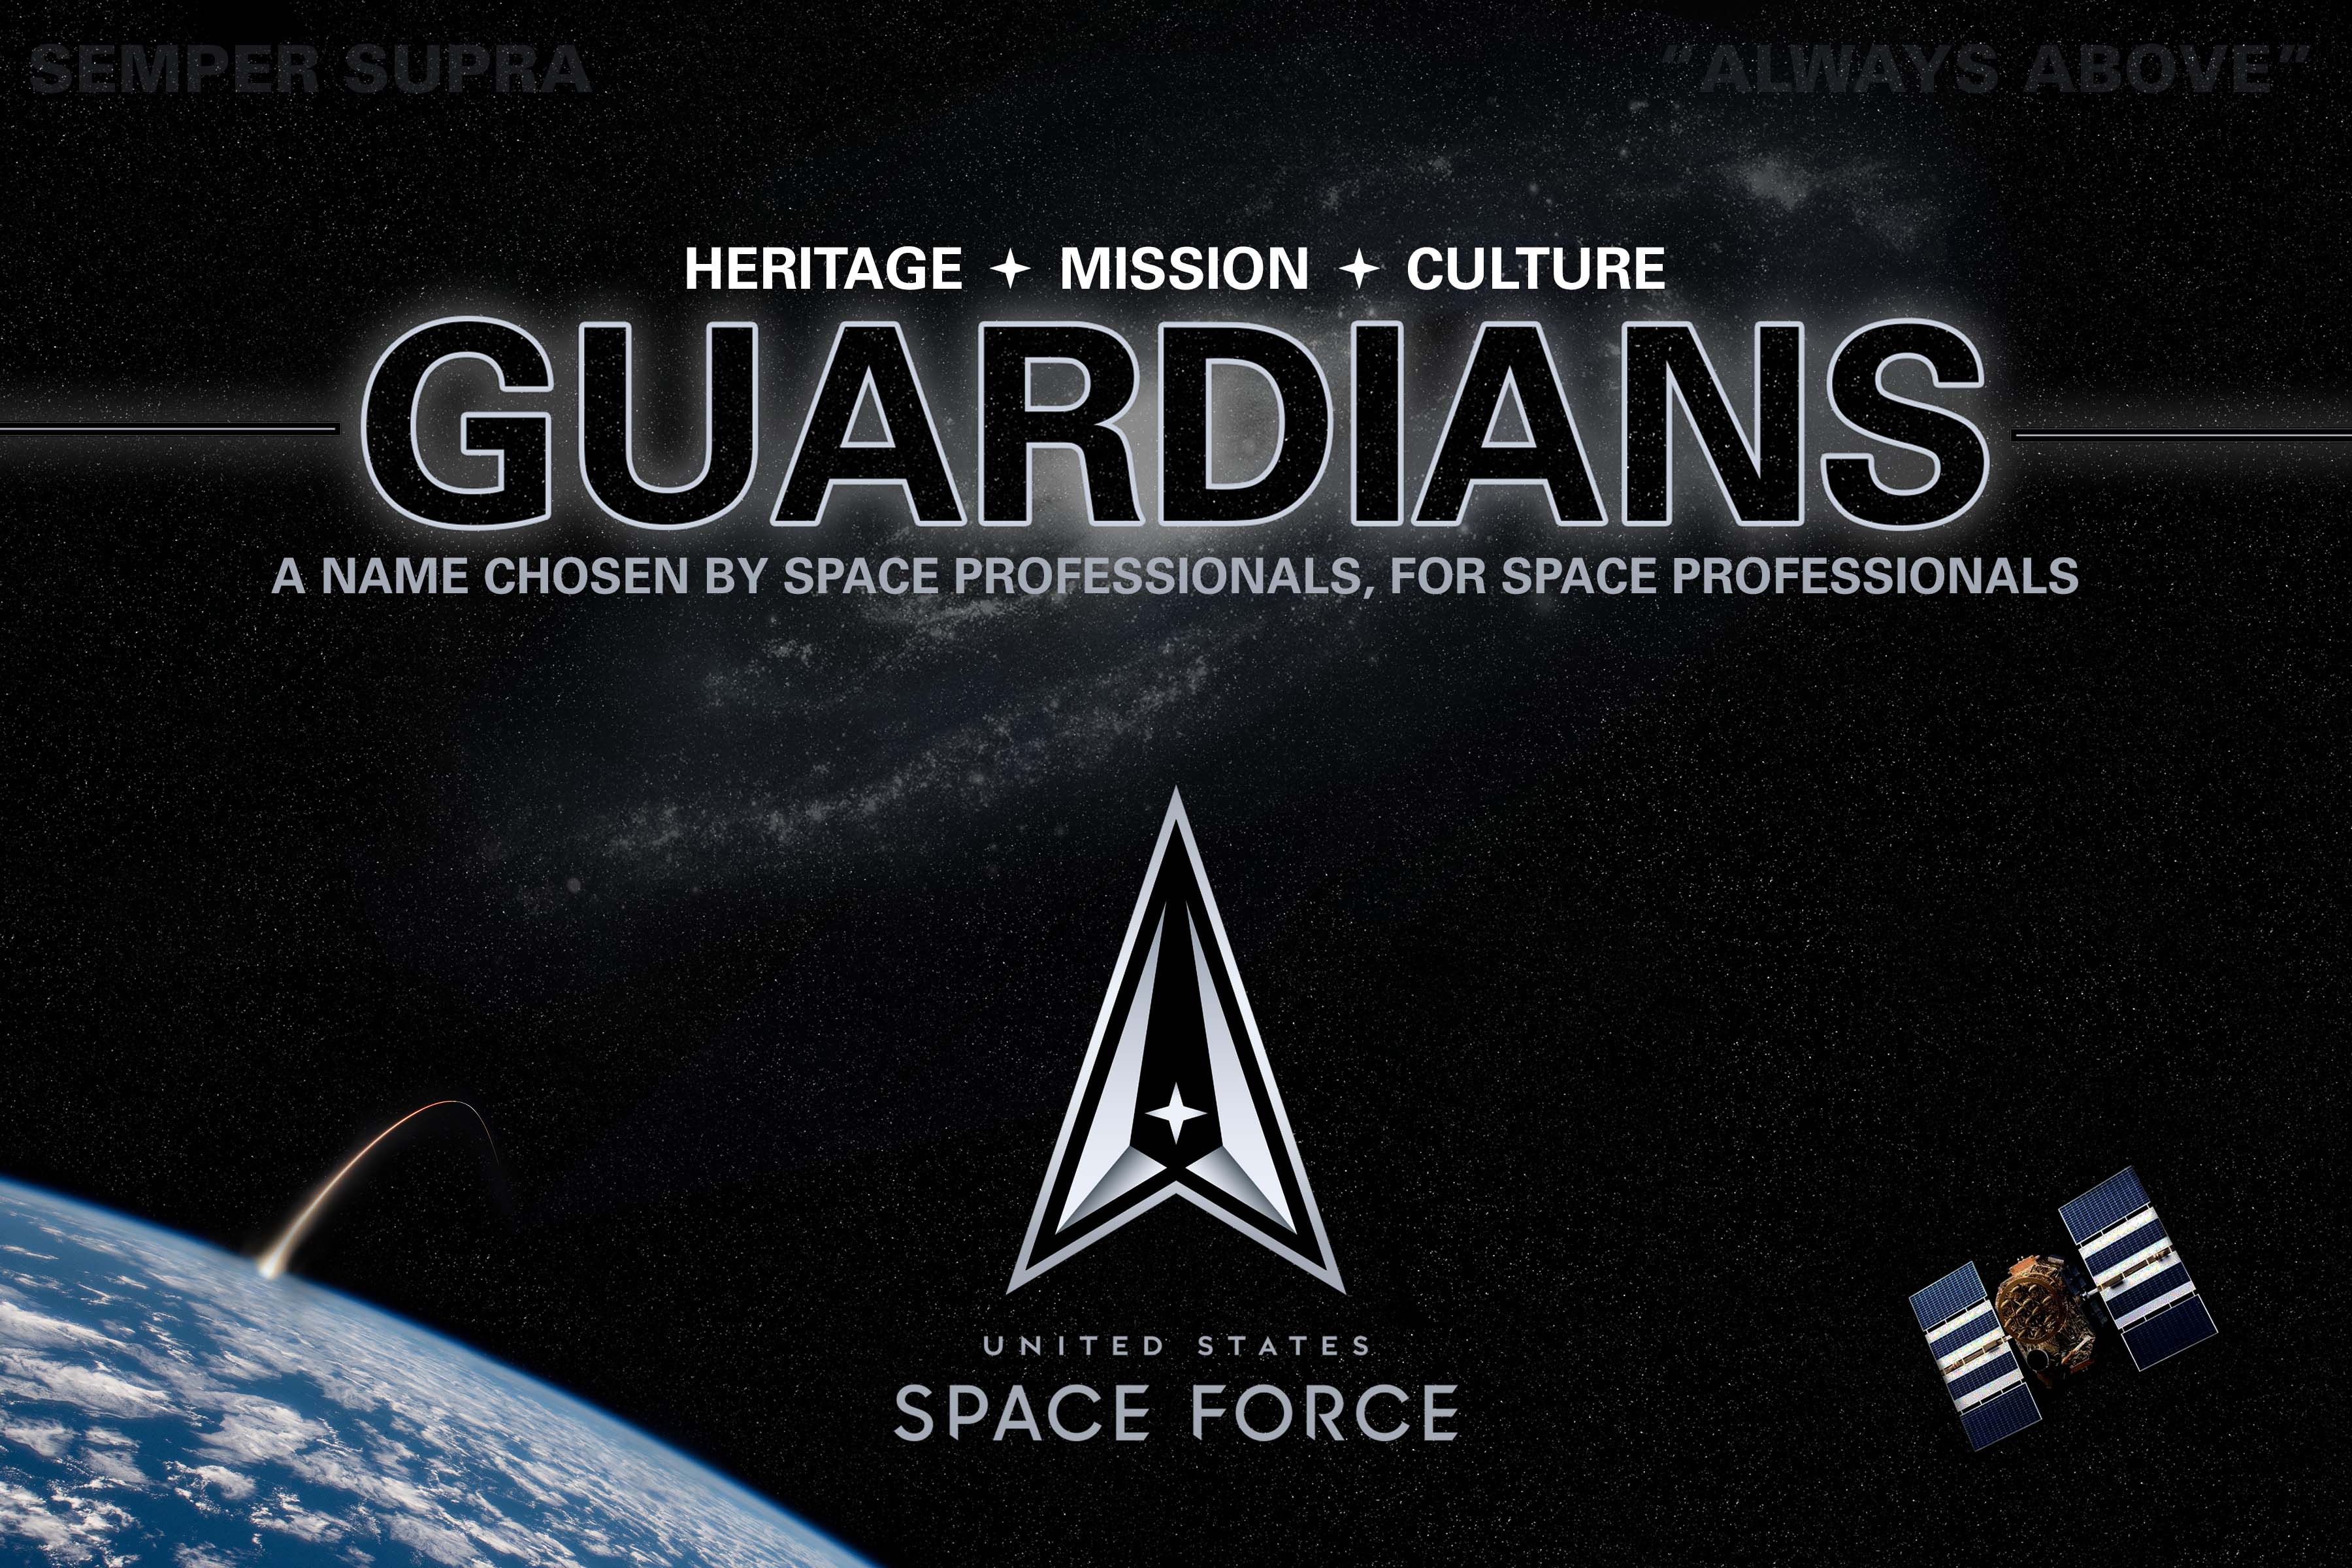 U.S. Space Force unveils name of space professionals > United States